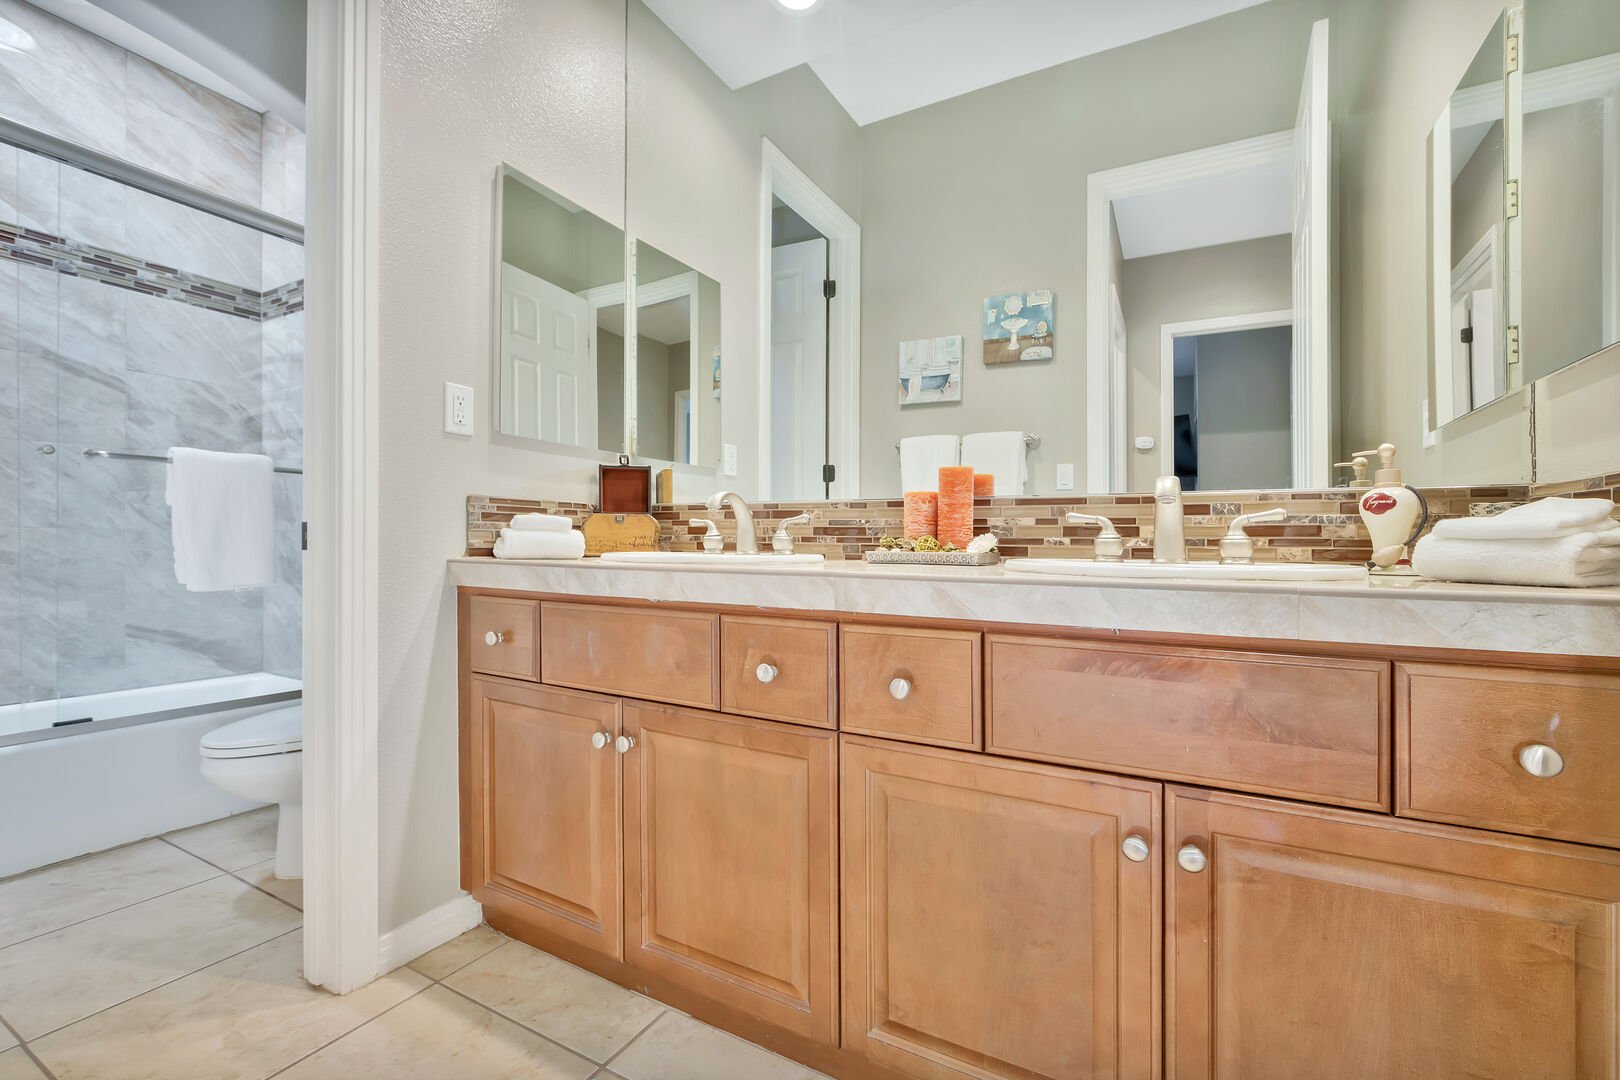 The hallway bathroom 4 is located next to the Laundry Room and features a shower bathtub combo and double vanity sinks.